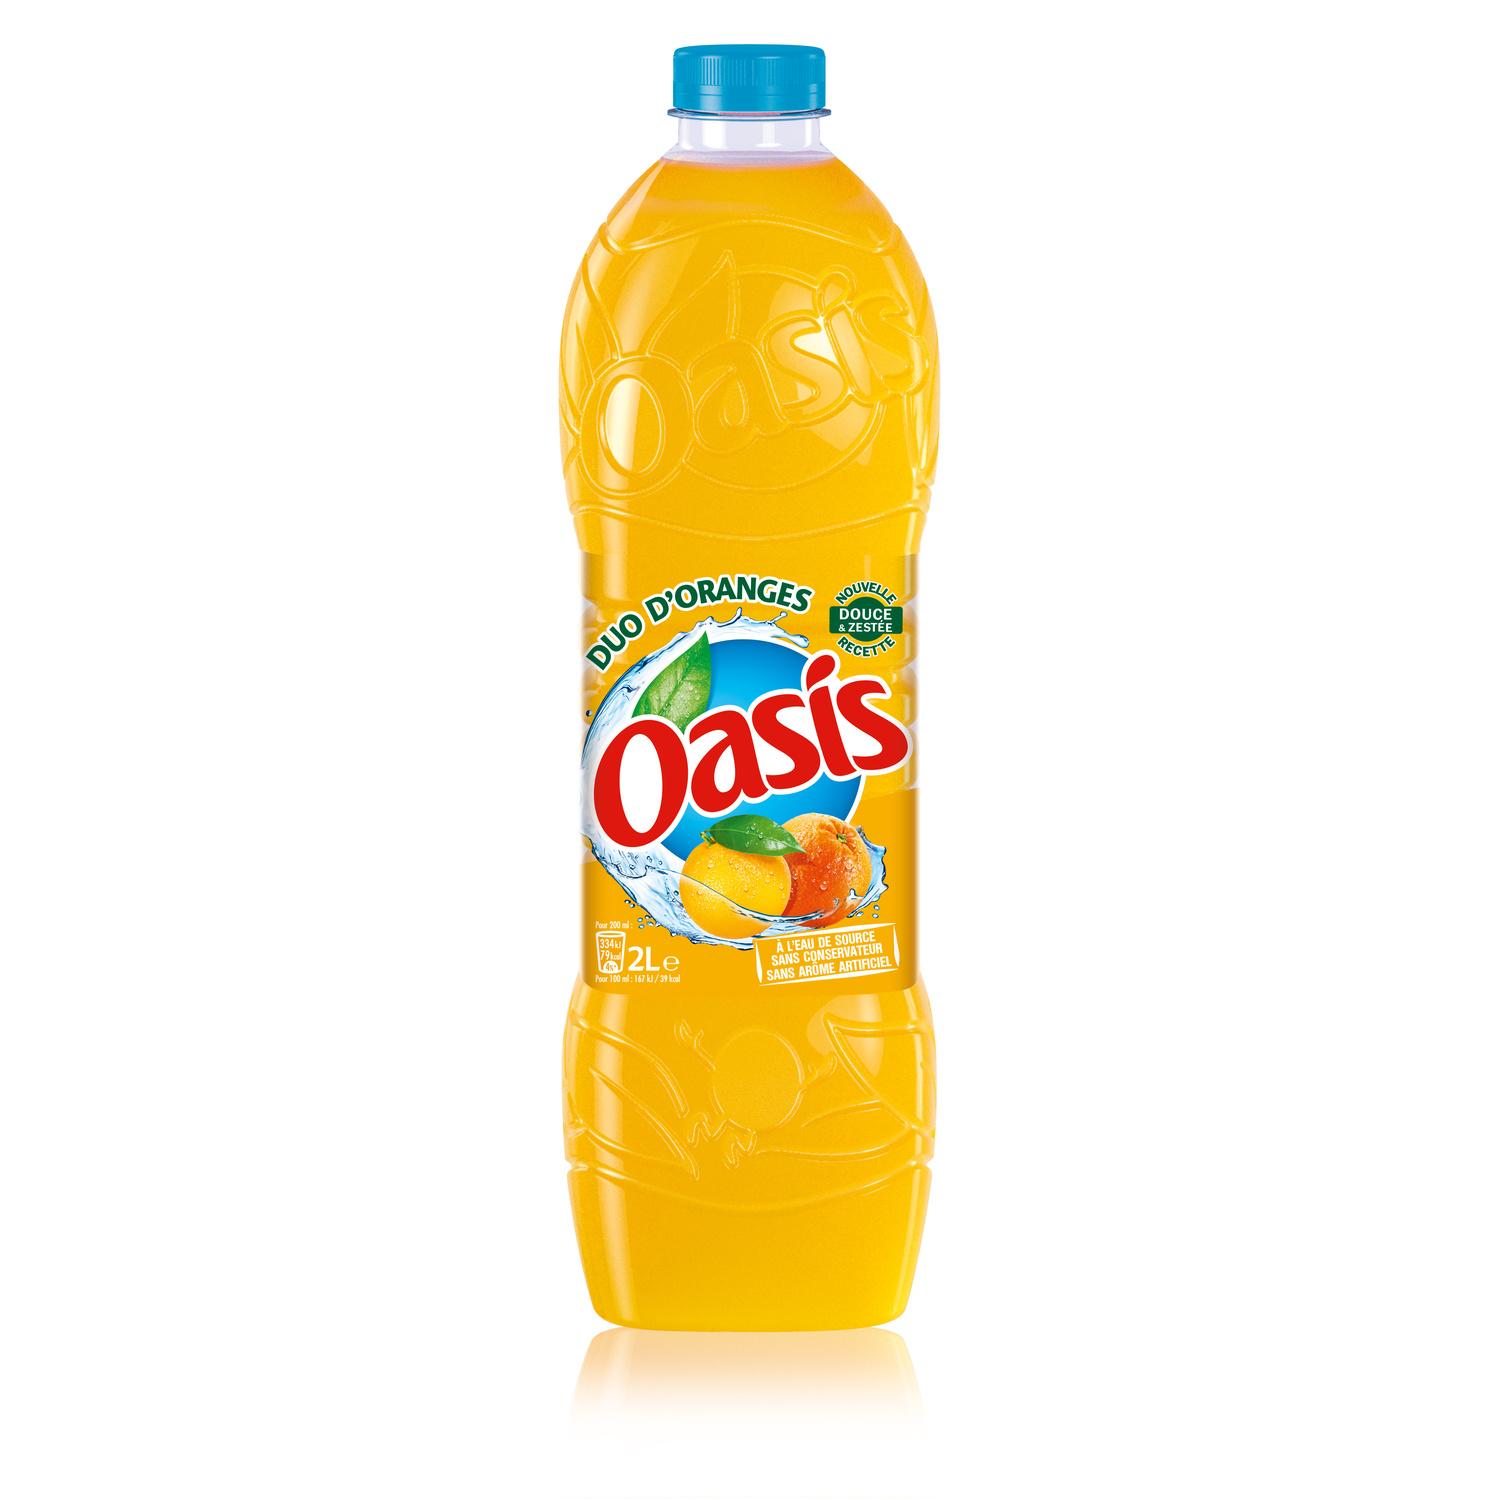 Oasis Orange Drink Buy Online My French Grocery